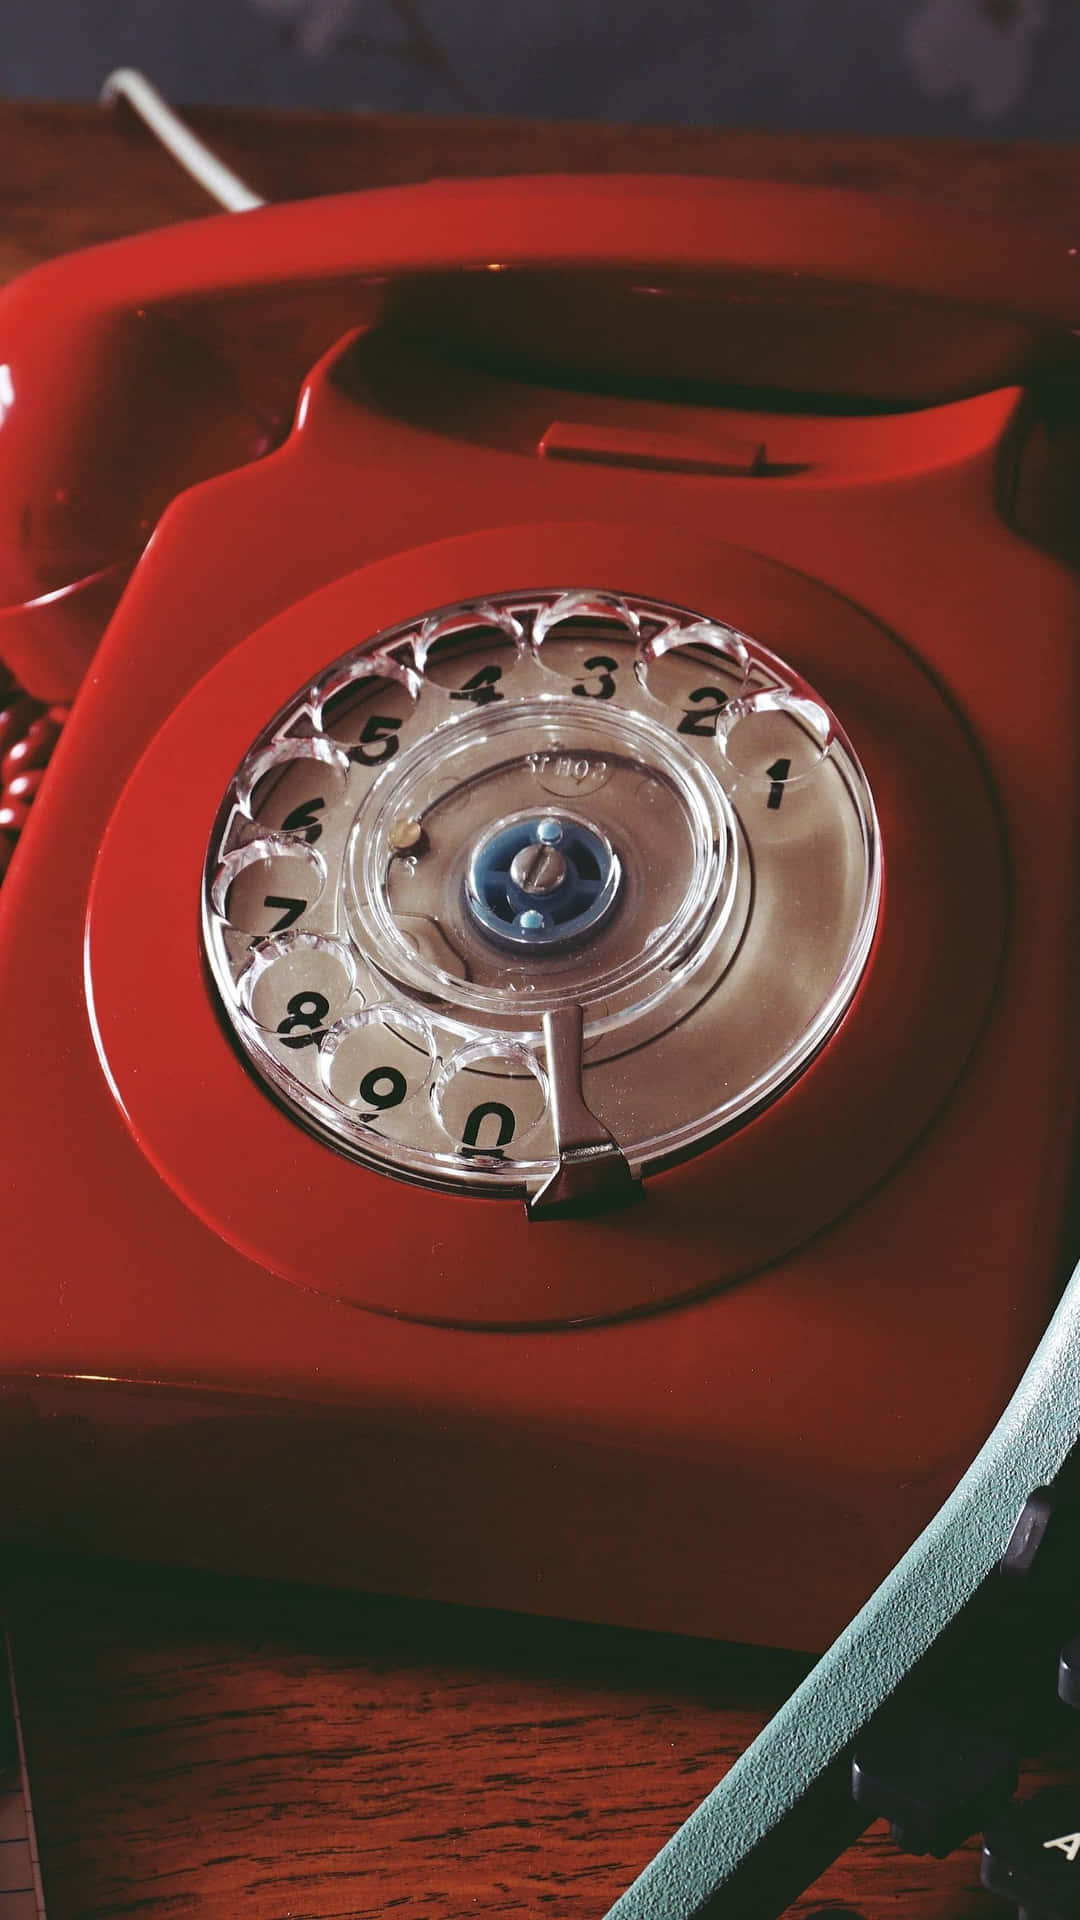 Vintage Red Rotary Phone Wallpaper